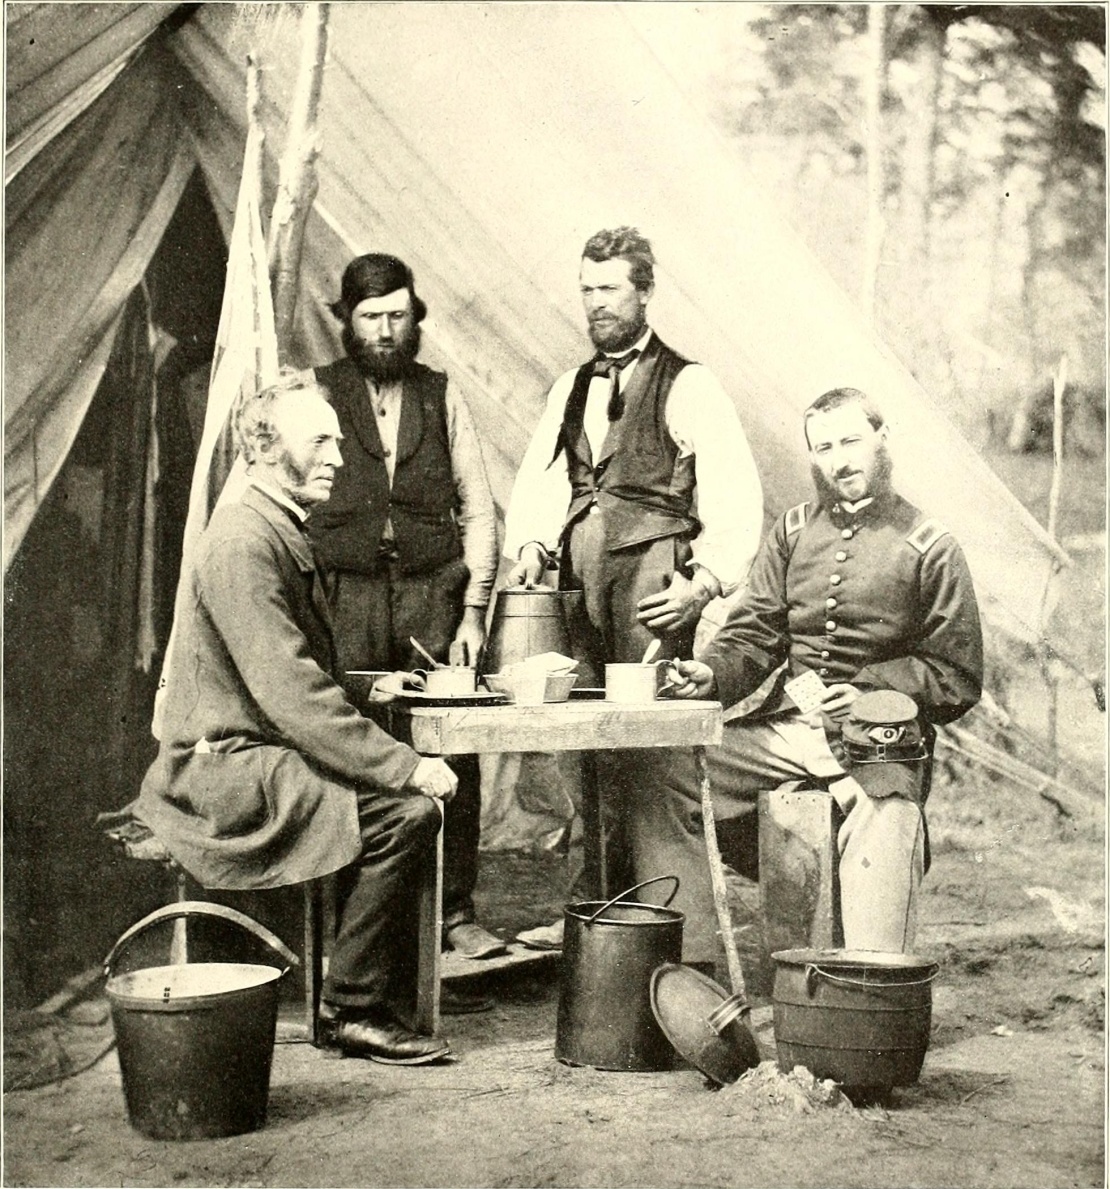 Union soldiers with cups of coffee during the American Civil War.